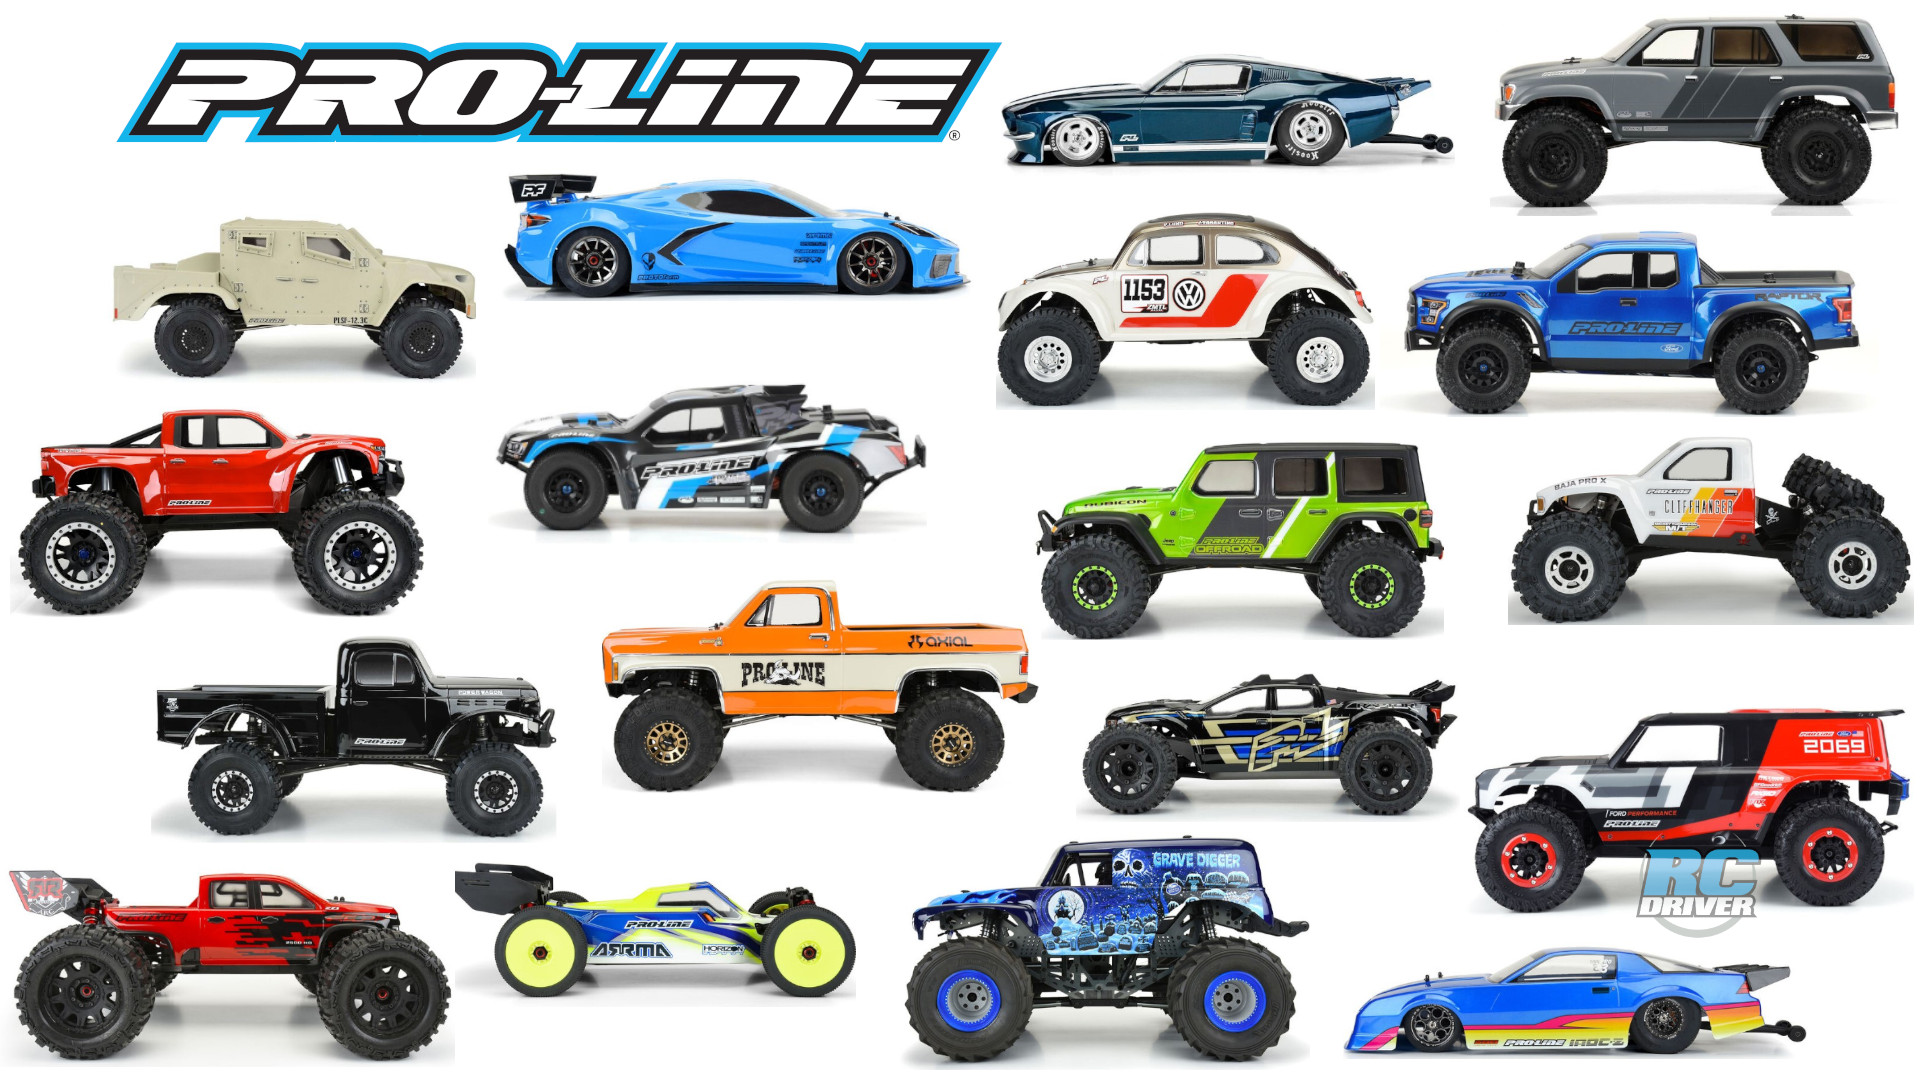 Pro-Line Makes RC Body Selection Easy